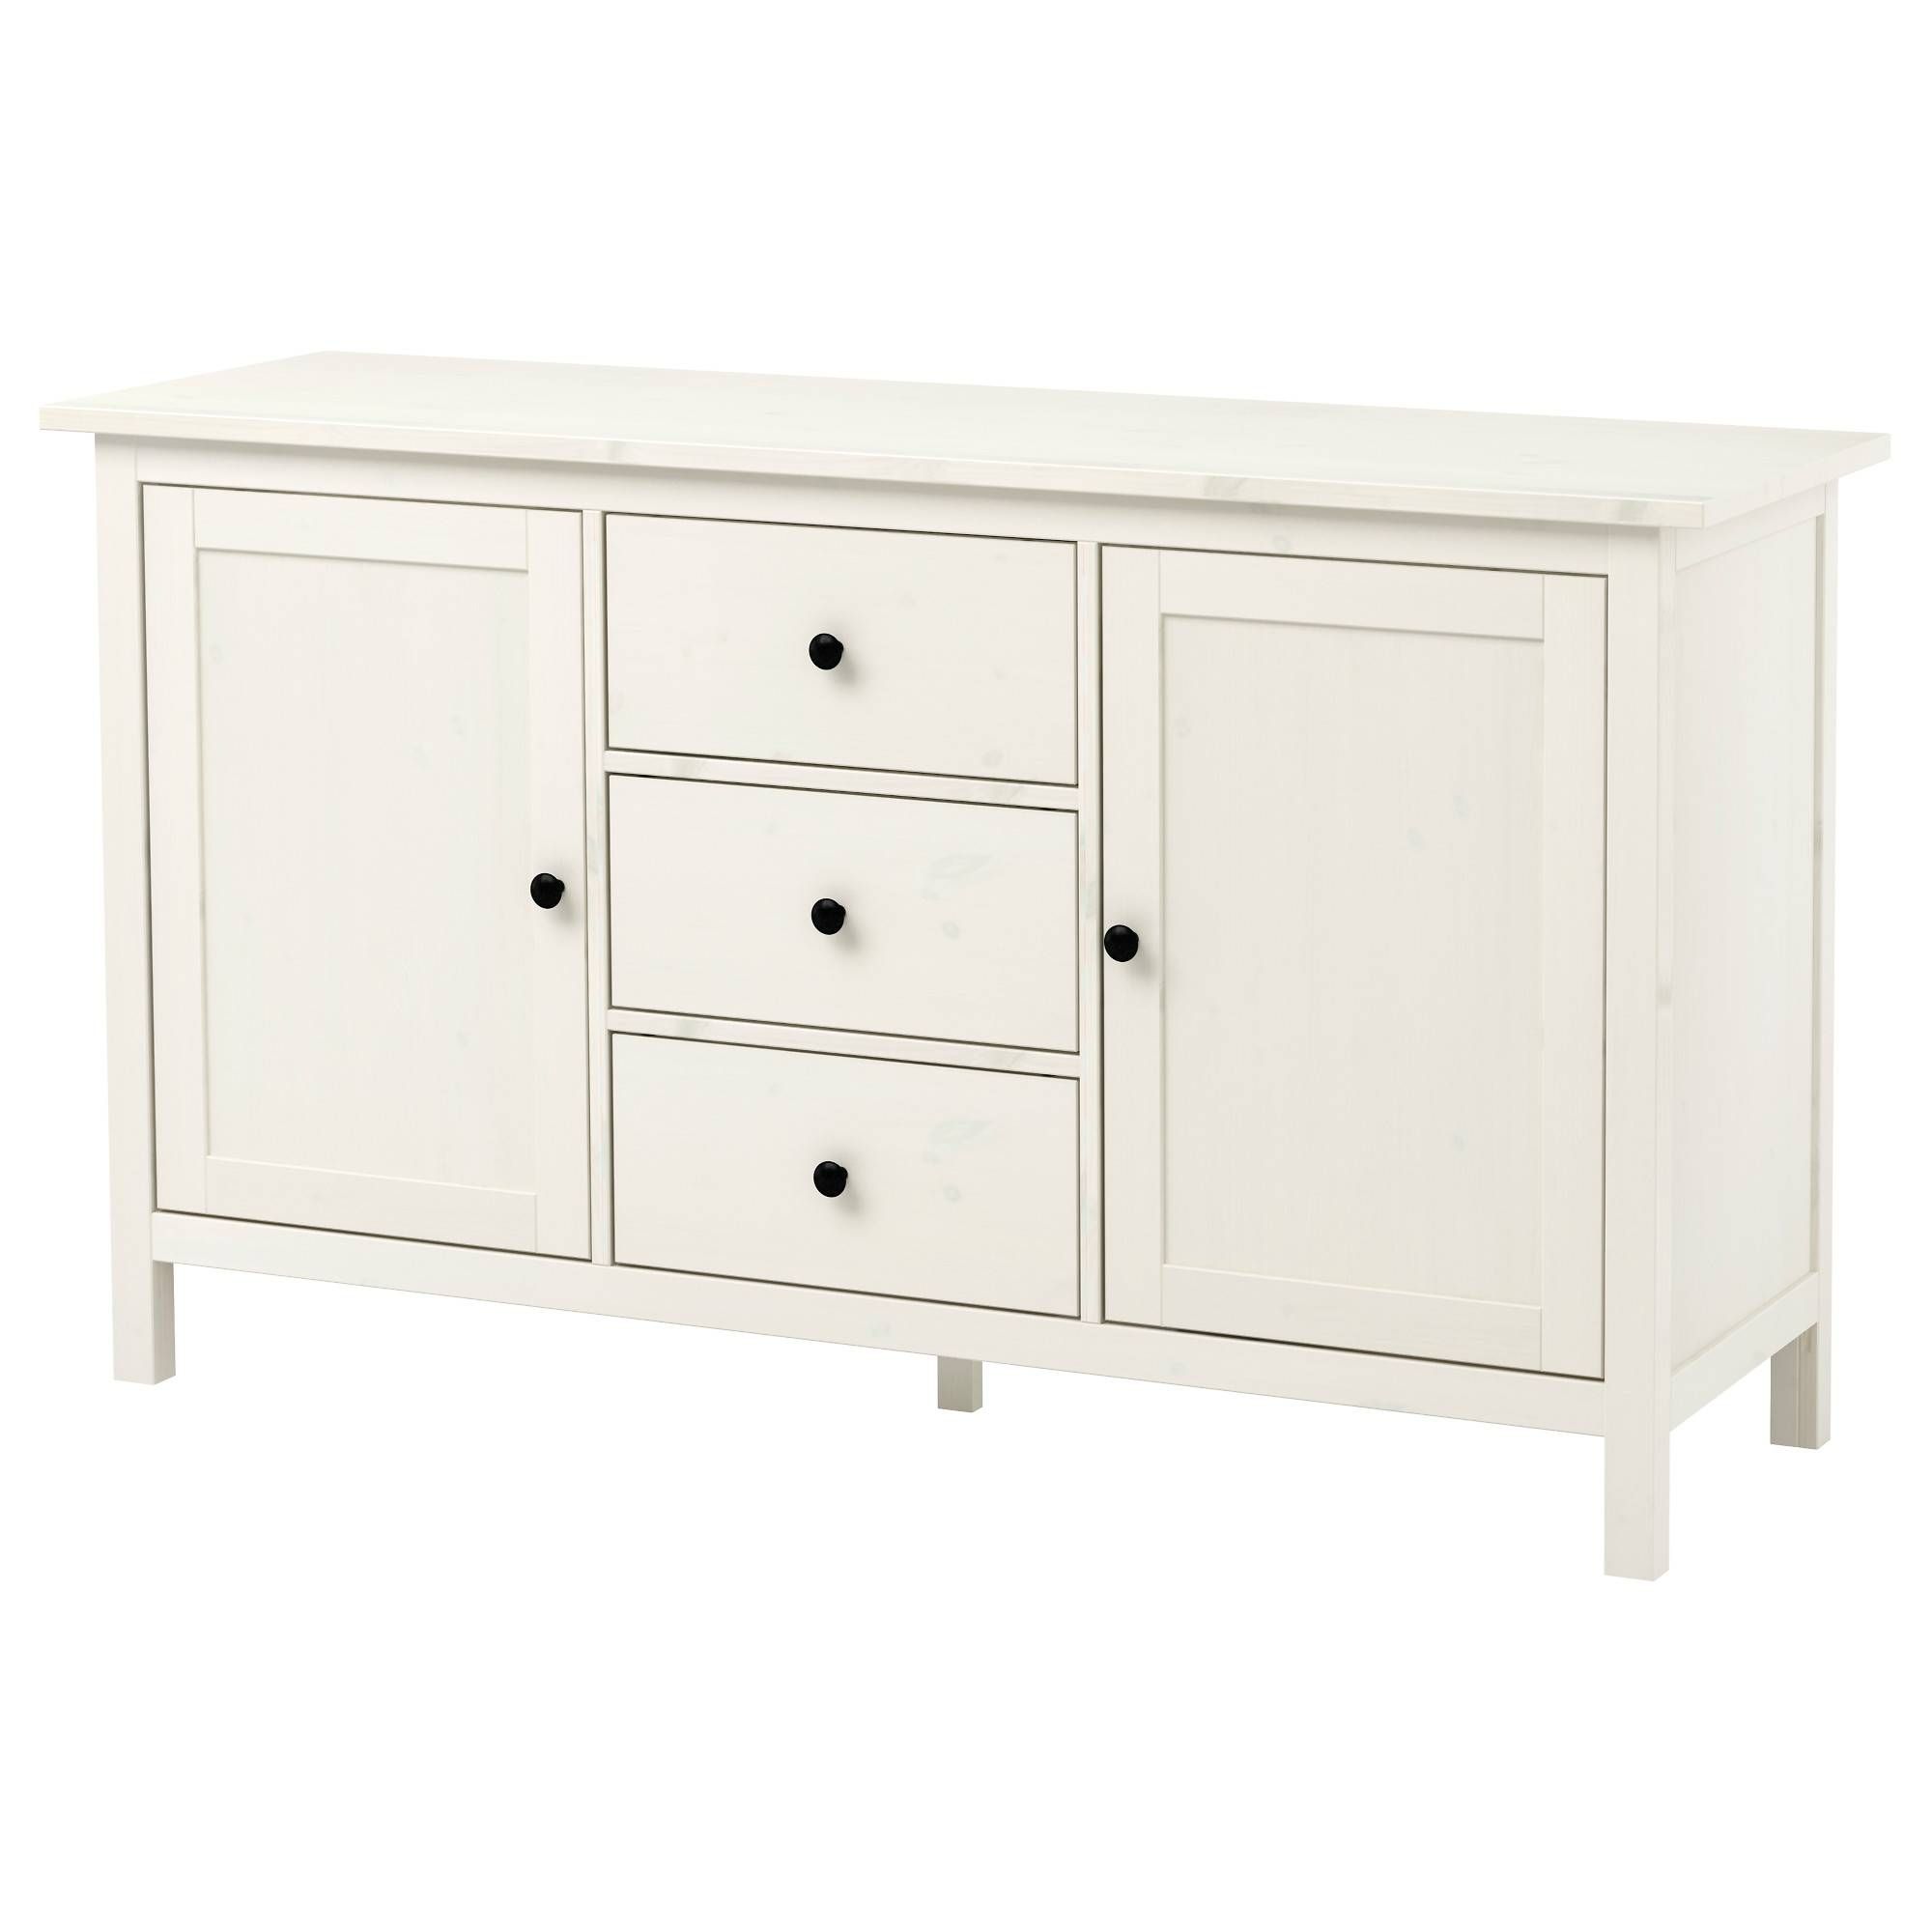 Buffet Tables & Sideboards – Ikea Within Free Standing Kitchen Sideboards (View 13 of 15)